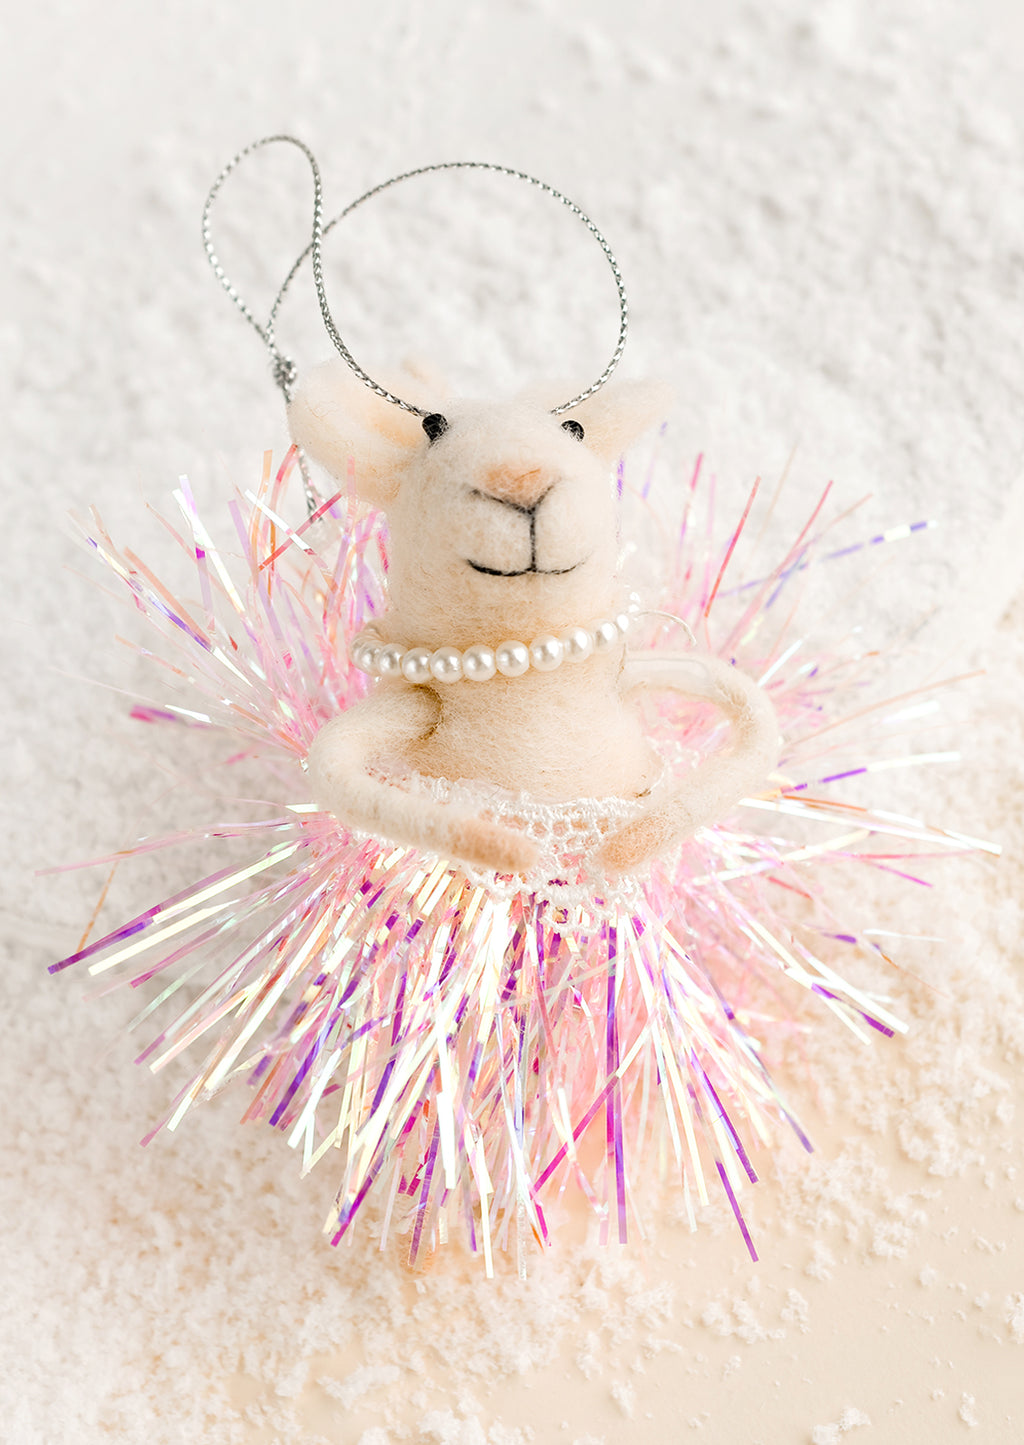 1: A felted holiday ornament of a mouse wearing a glittery tutu.